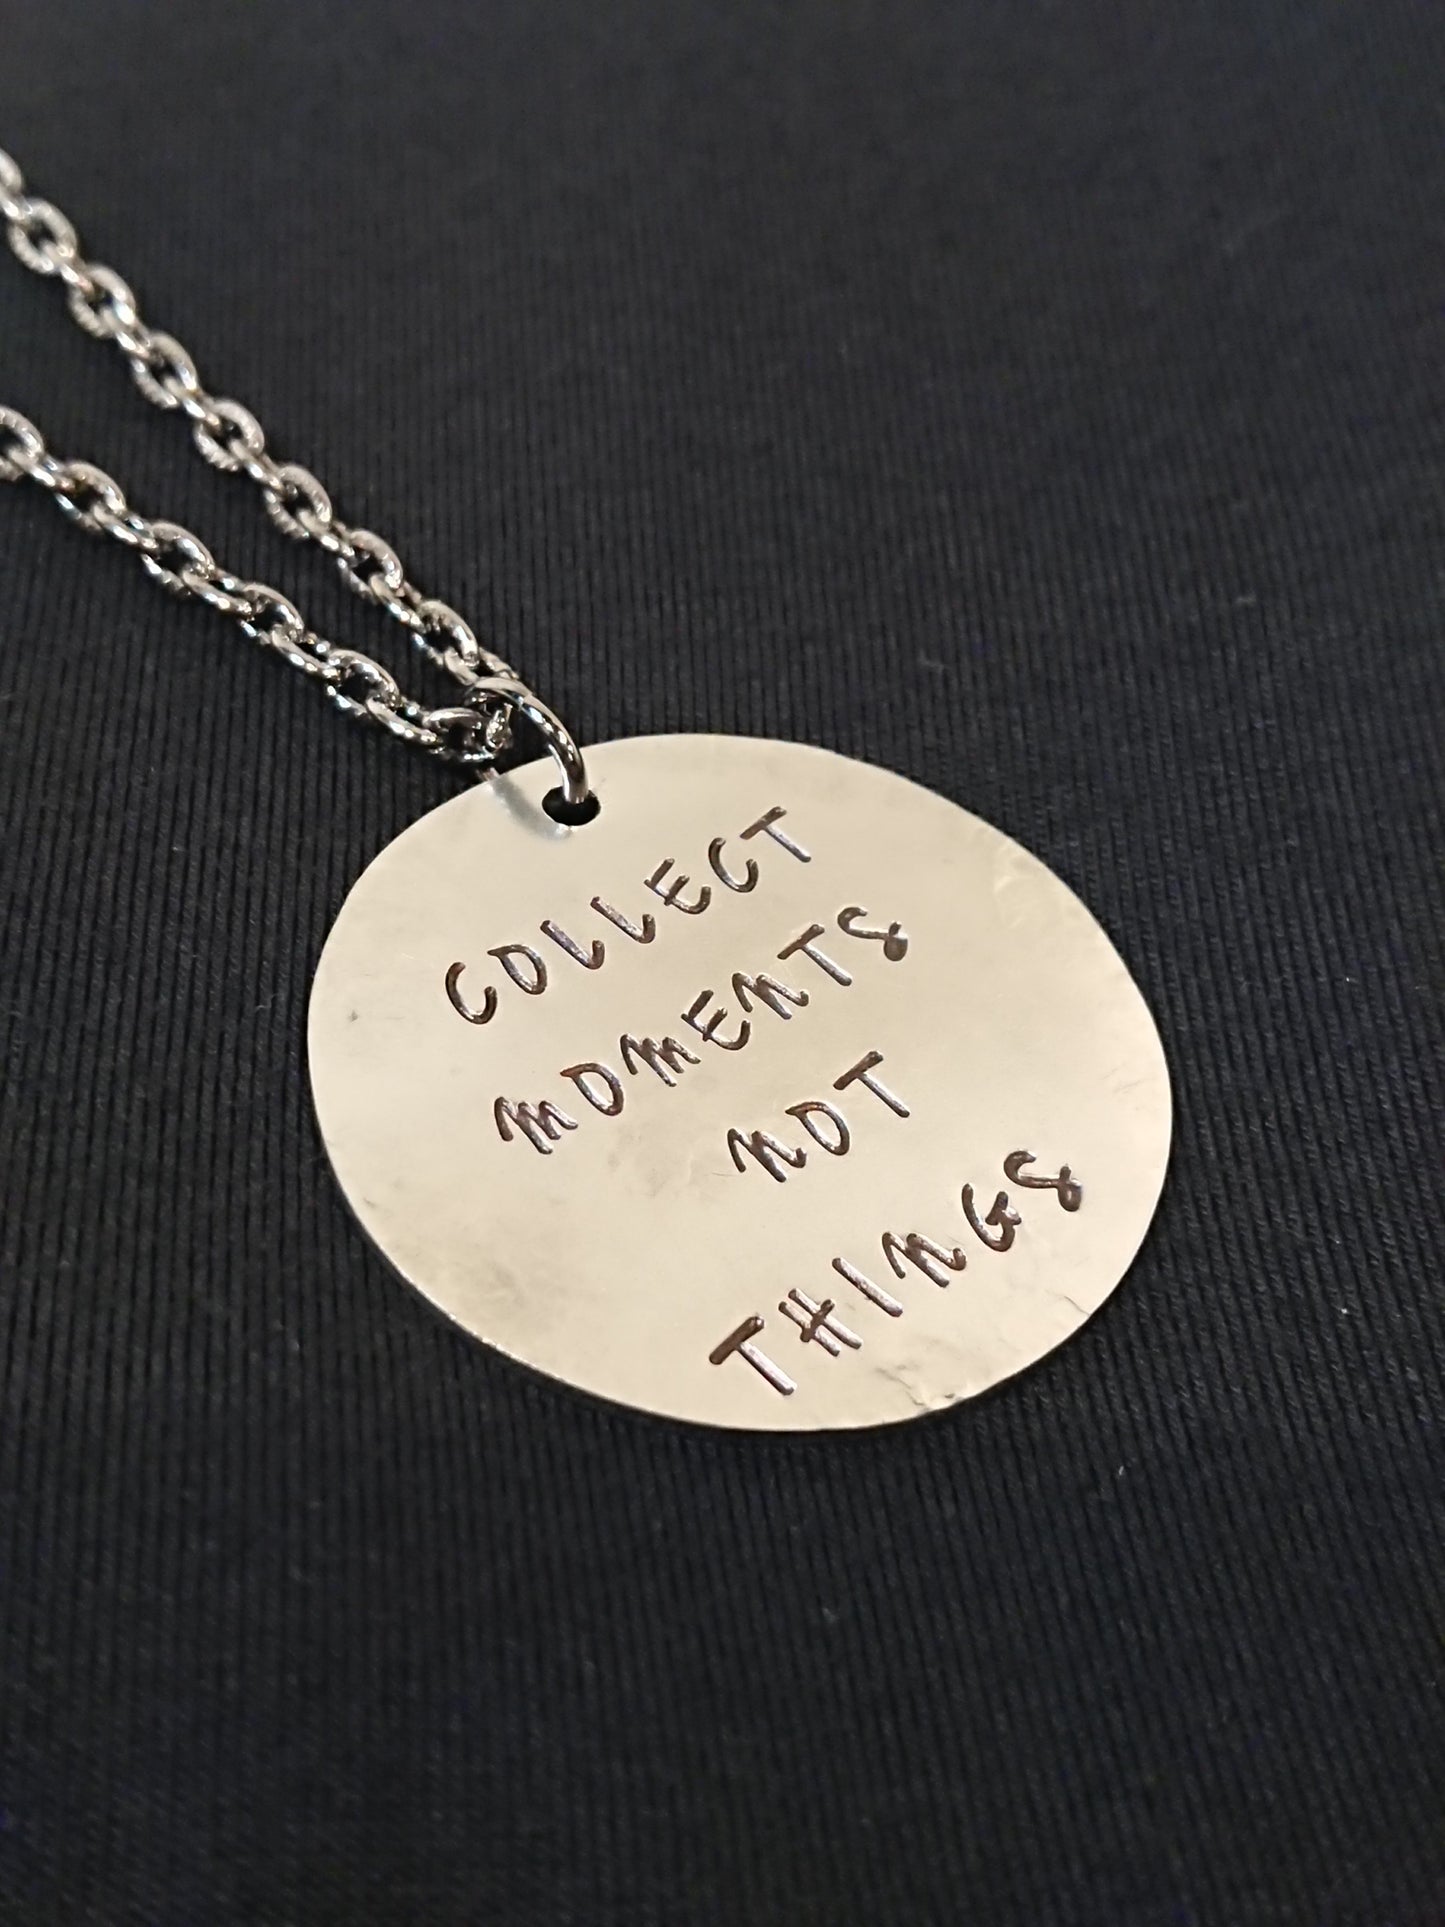 Ninestyles - Collect Moments Not Things Necklace (Circle)